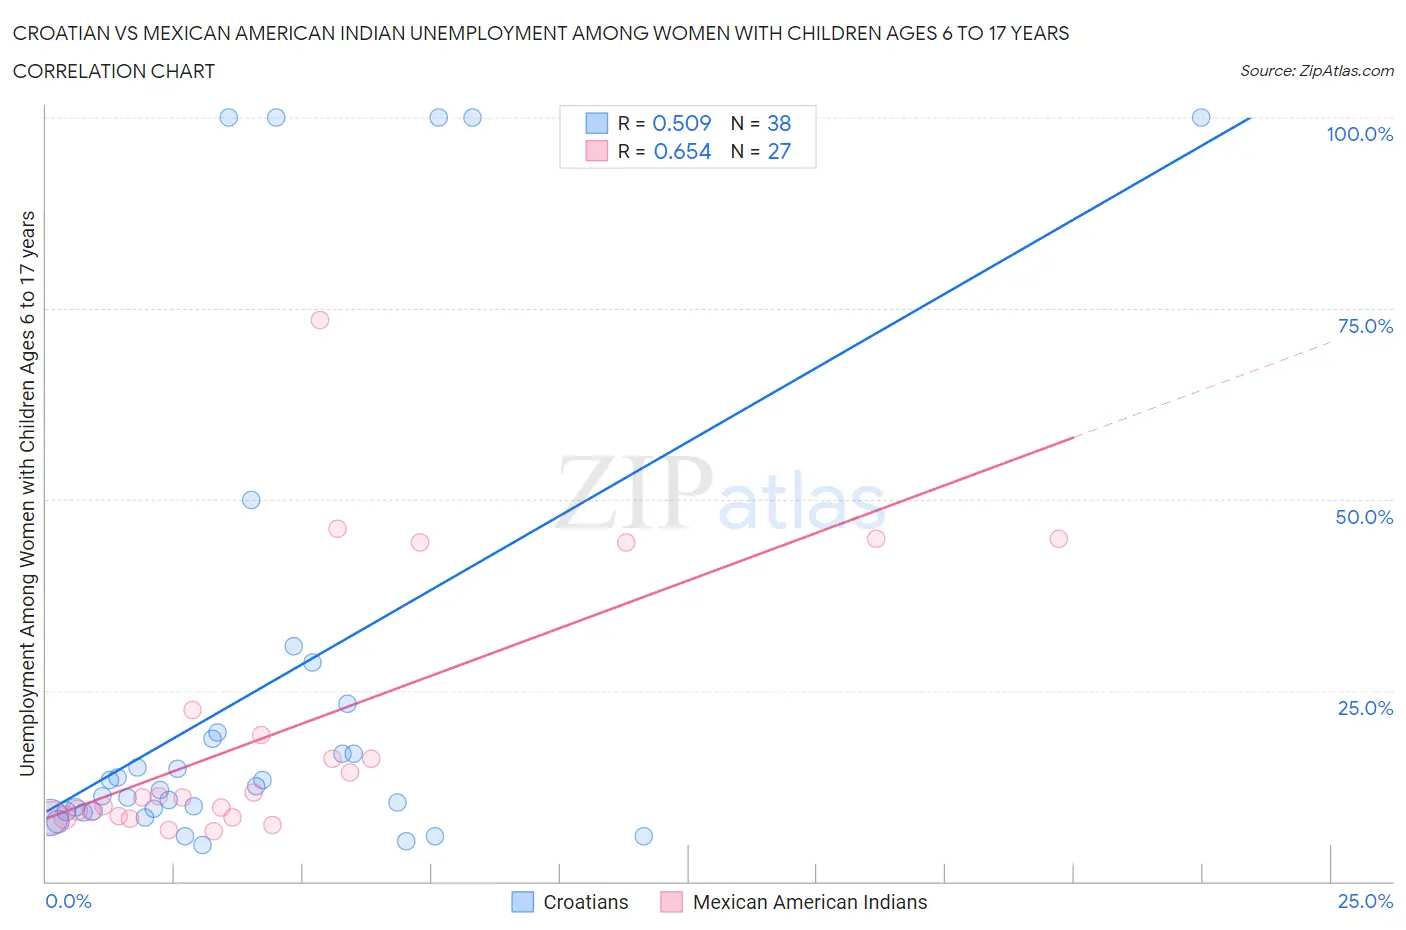 Croatian vs Mexican American Indian Unemployment Among Women with Children Ages 6 to 17 years